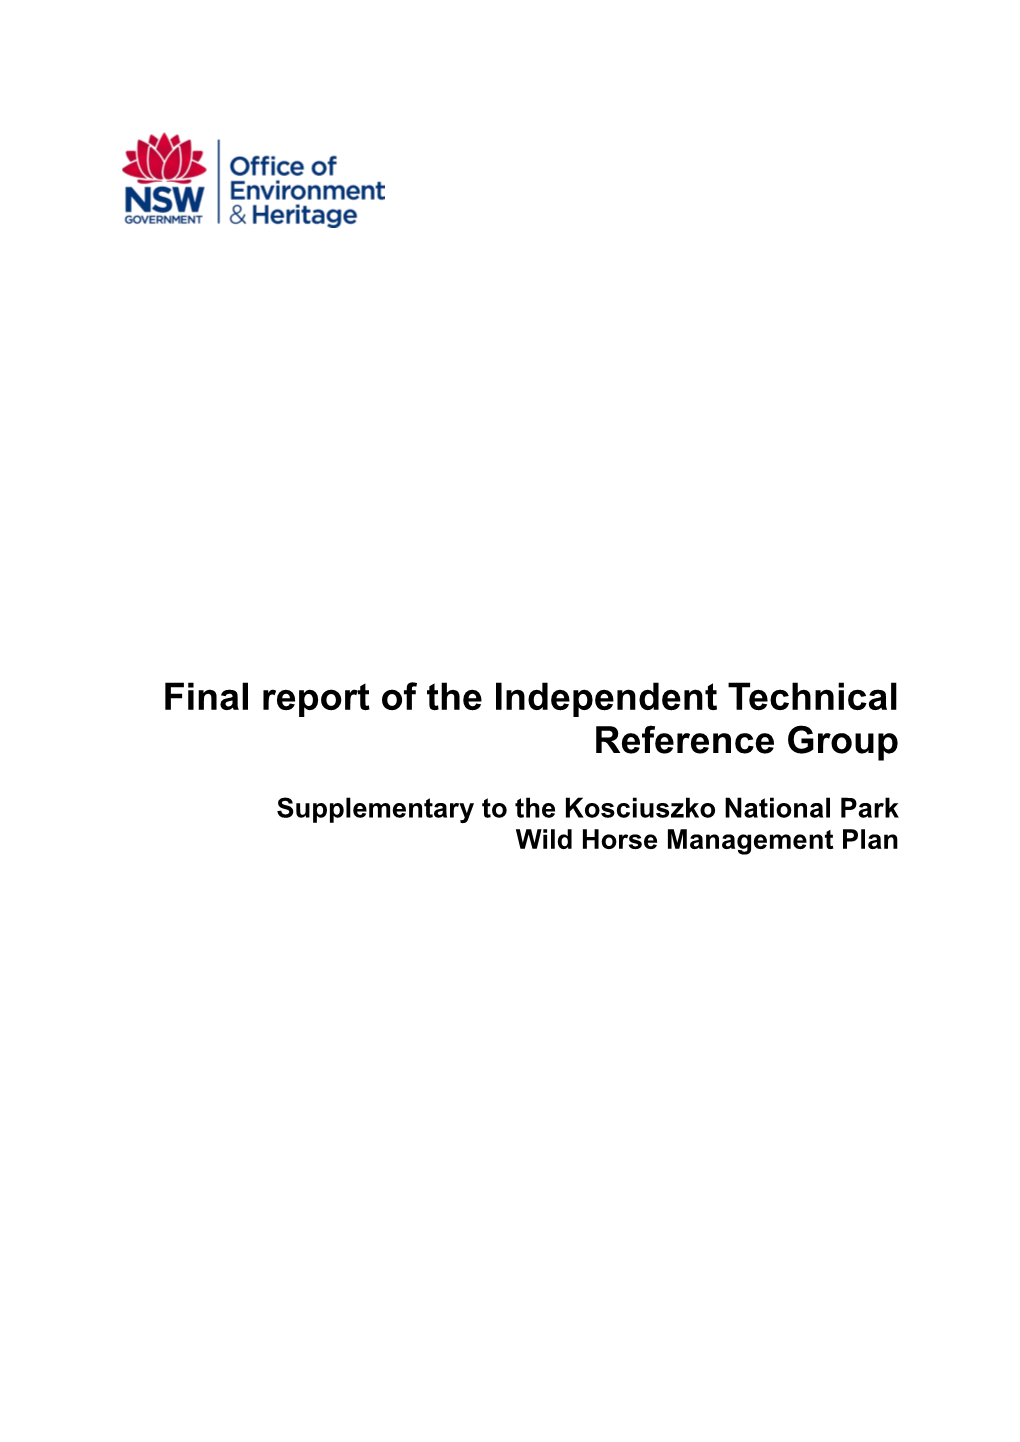 Final Report of the Independent Technical Reference Group